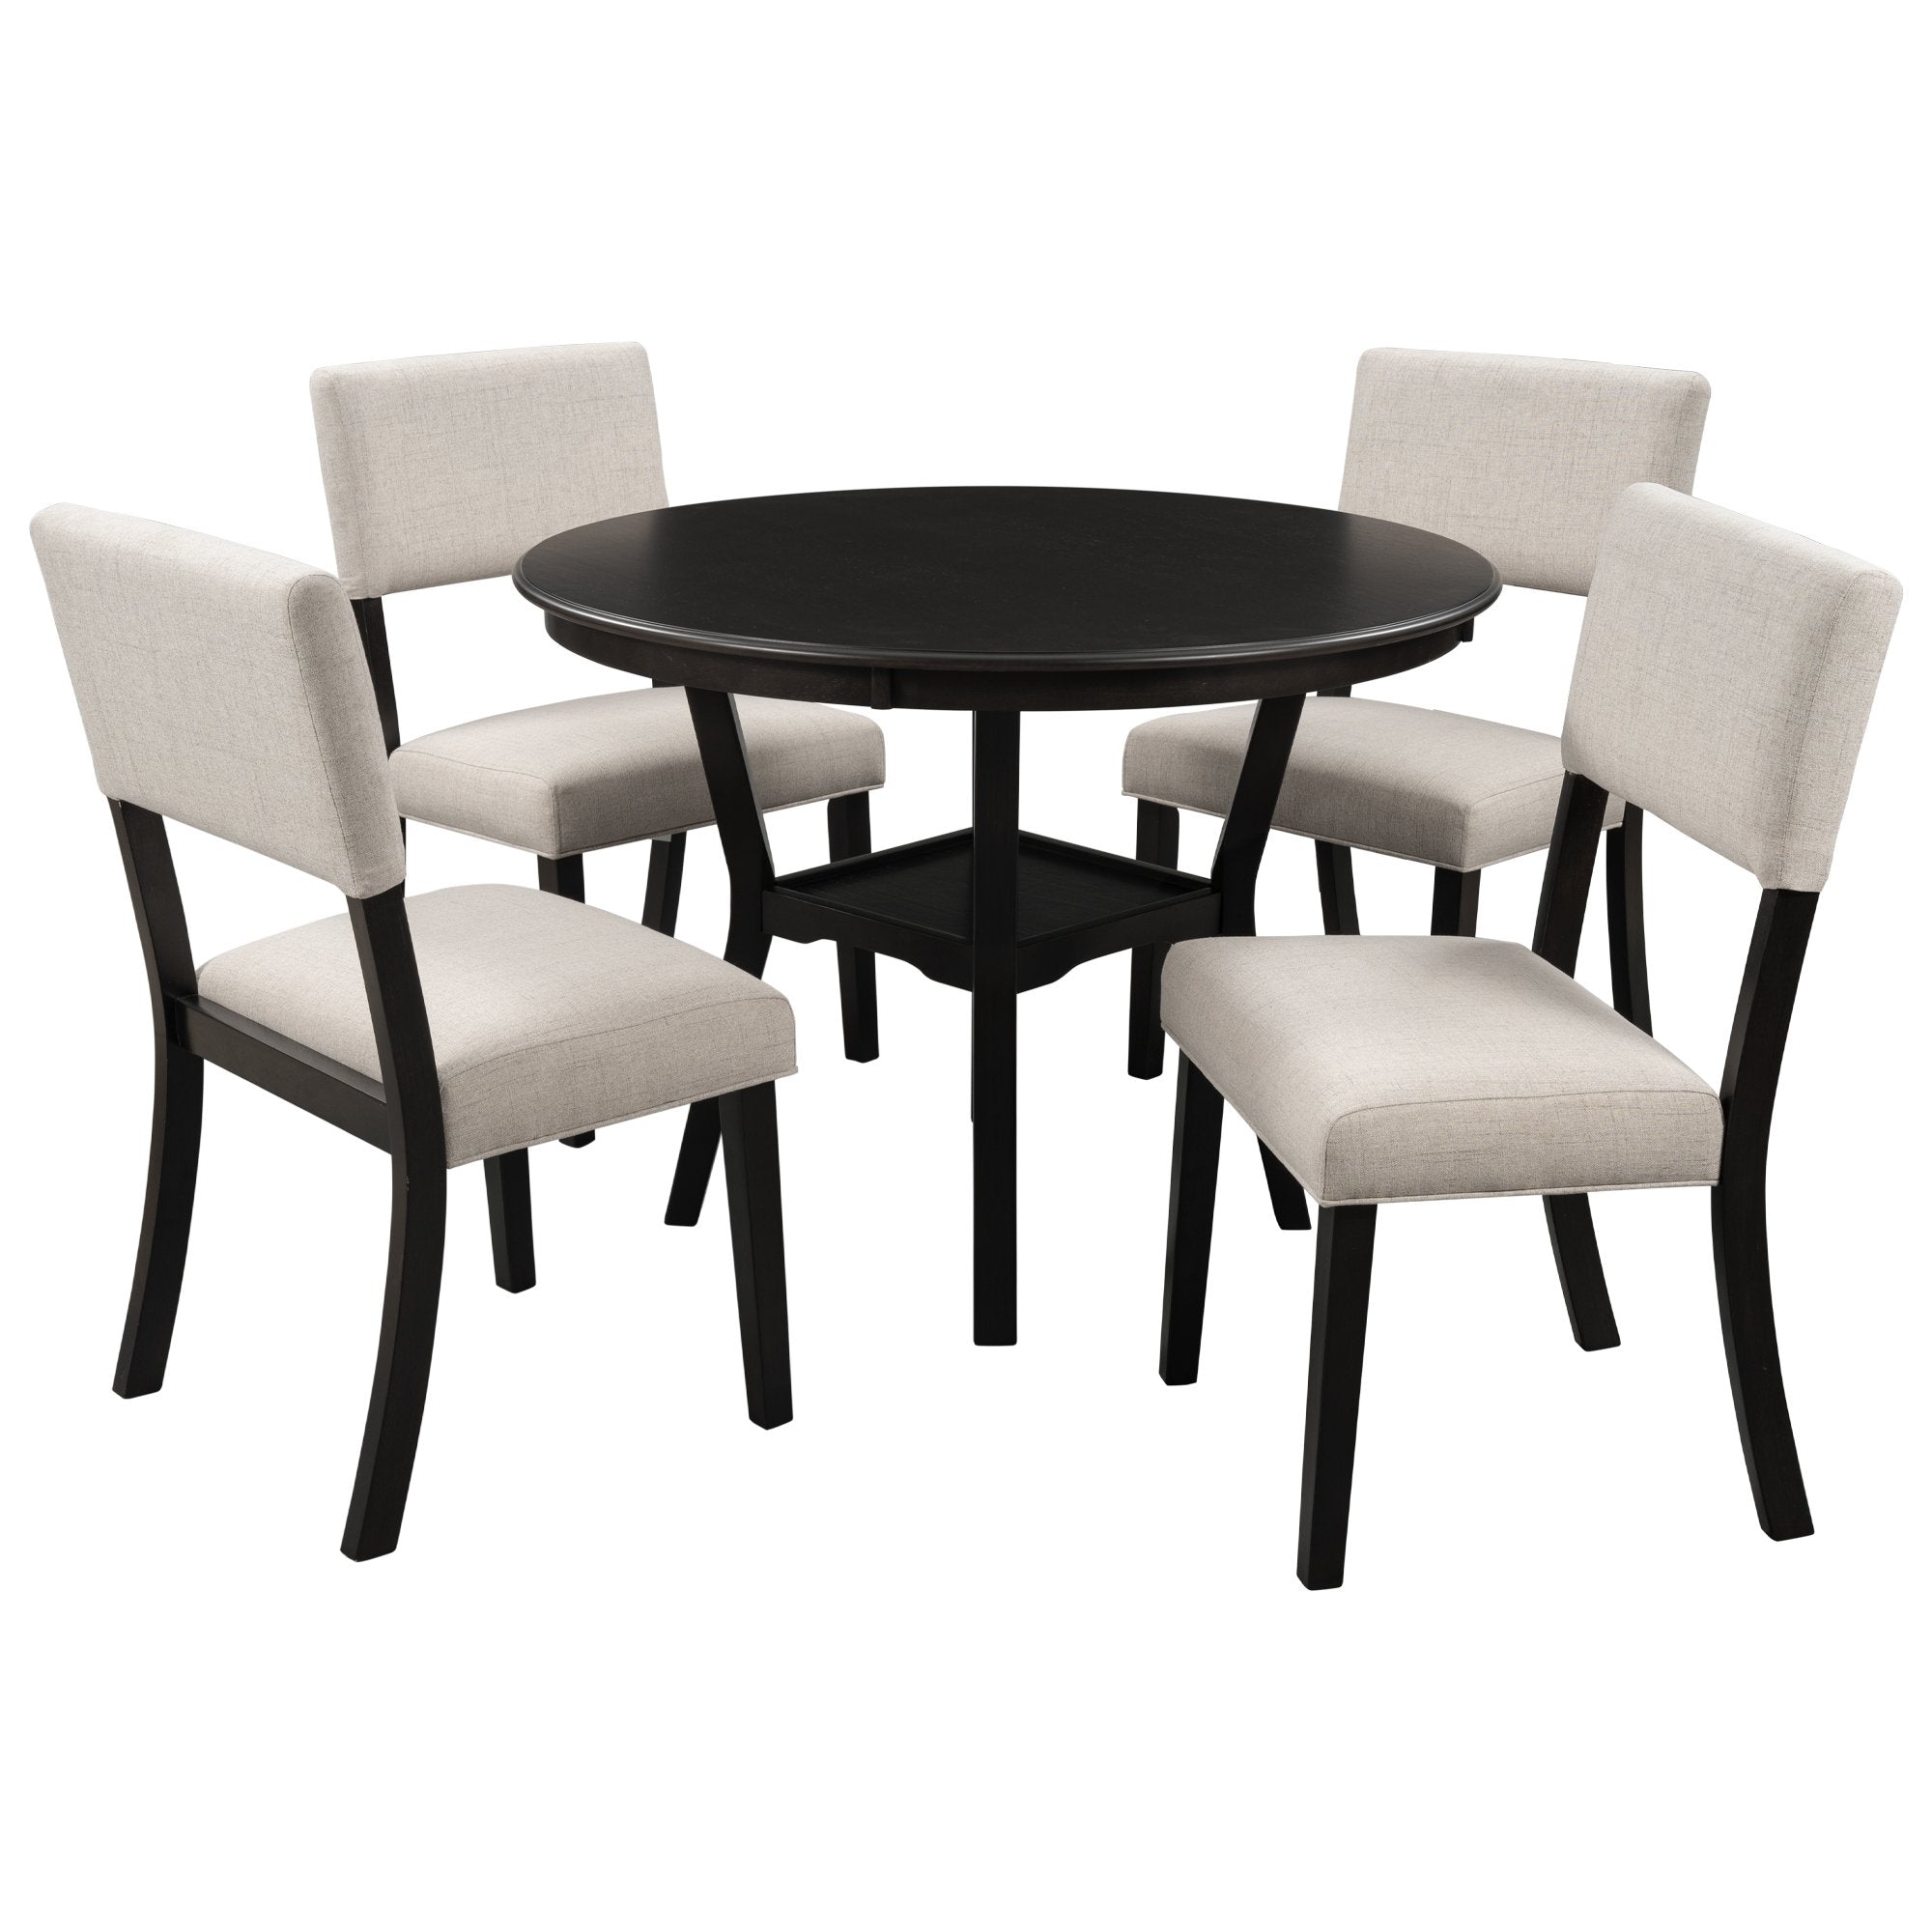 5-Piece Kitchen Dining Table Set Round Table with Bottom Shelf 4 Upholstered Chairs for Dining Room Espresso